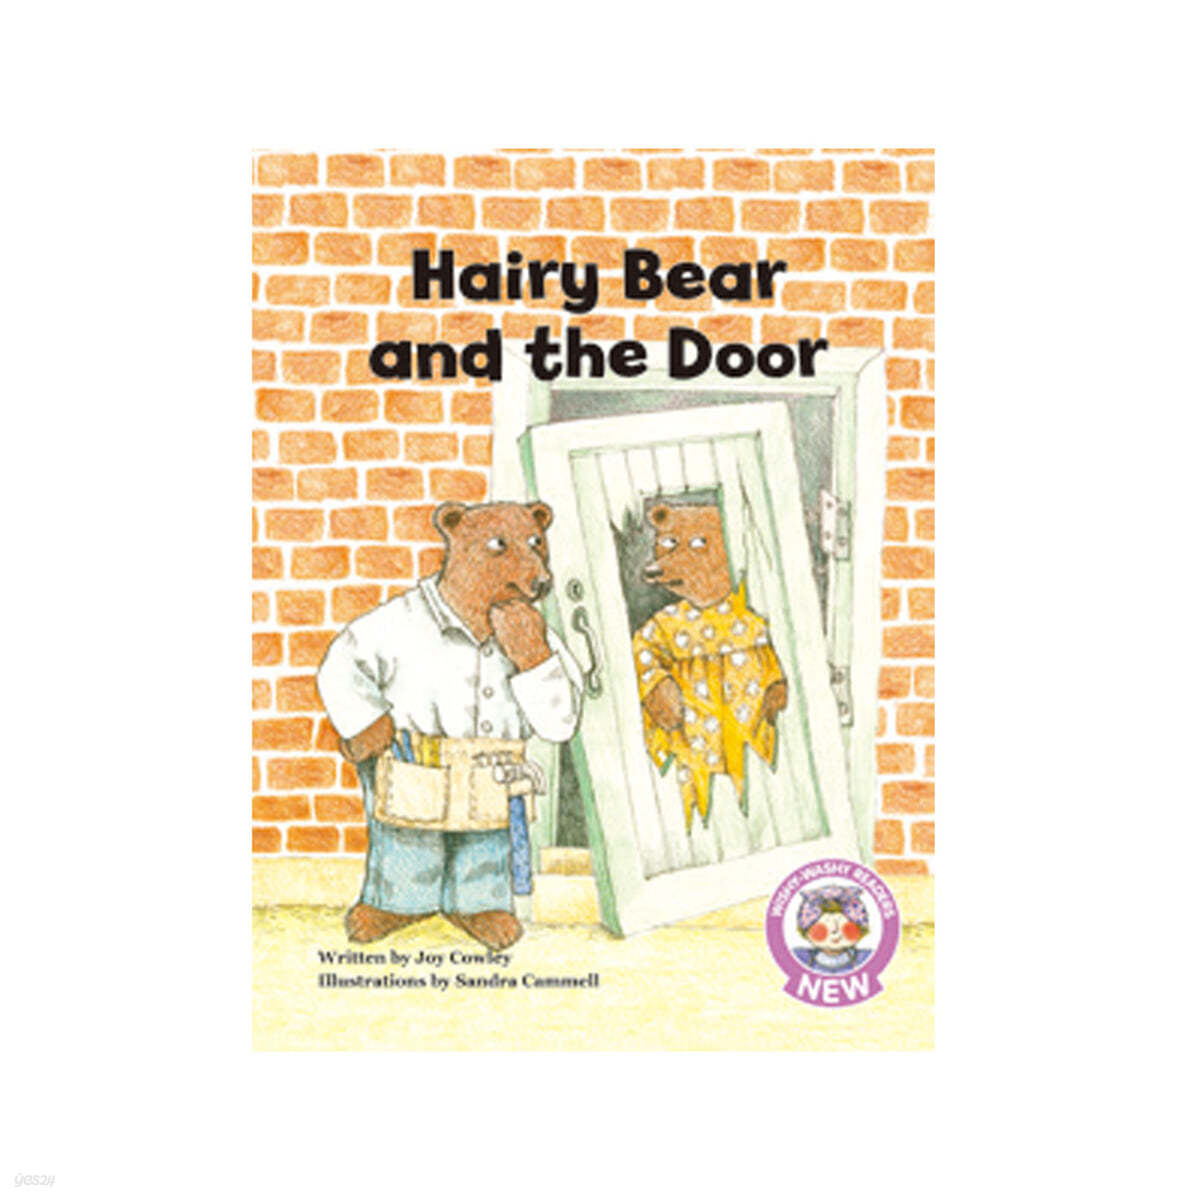 Hairy bear and the door